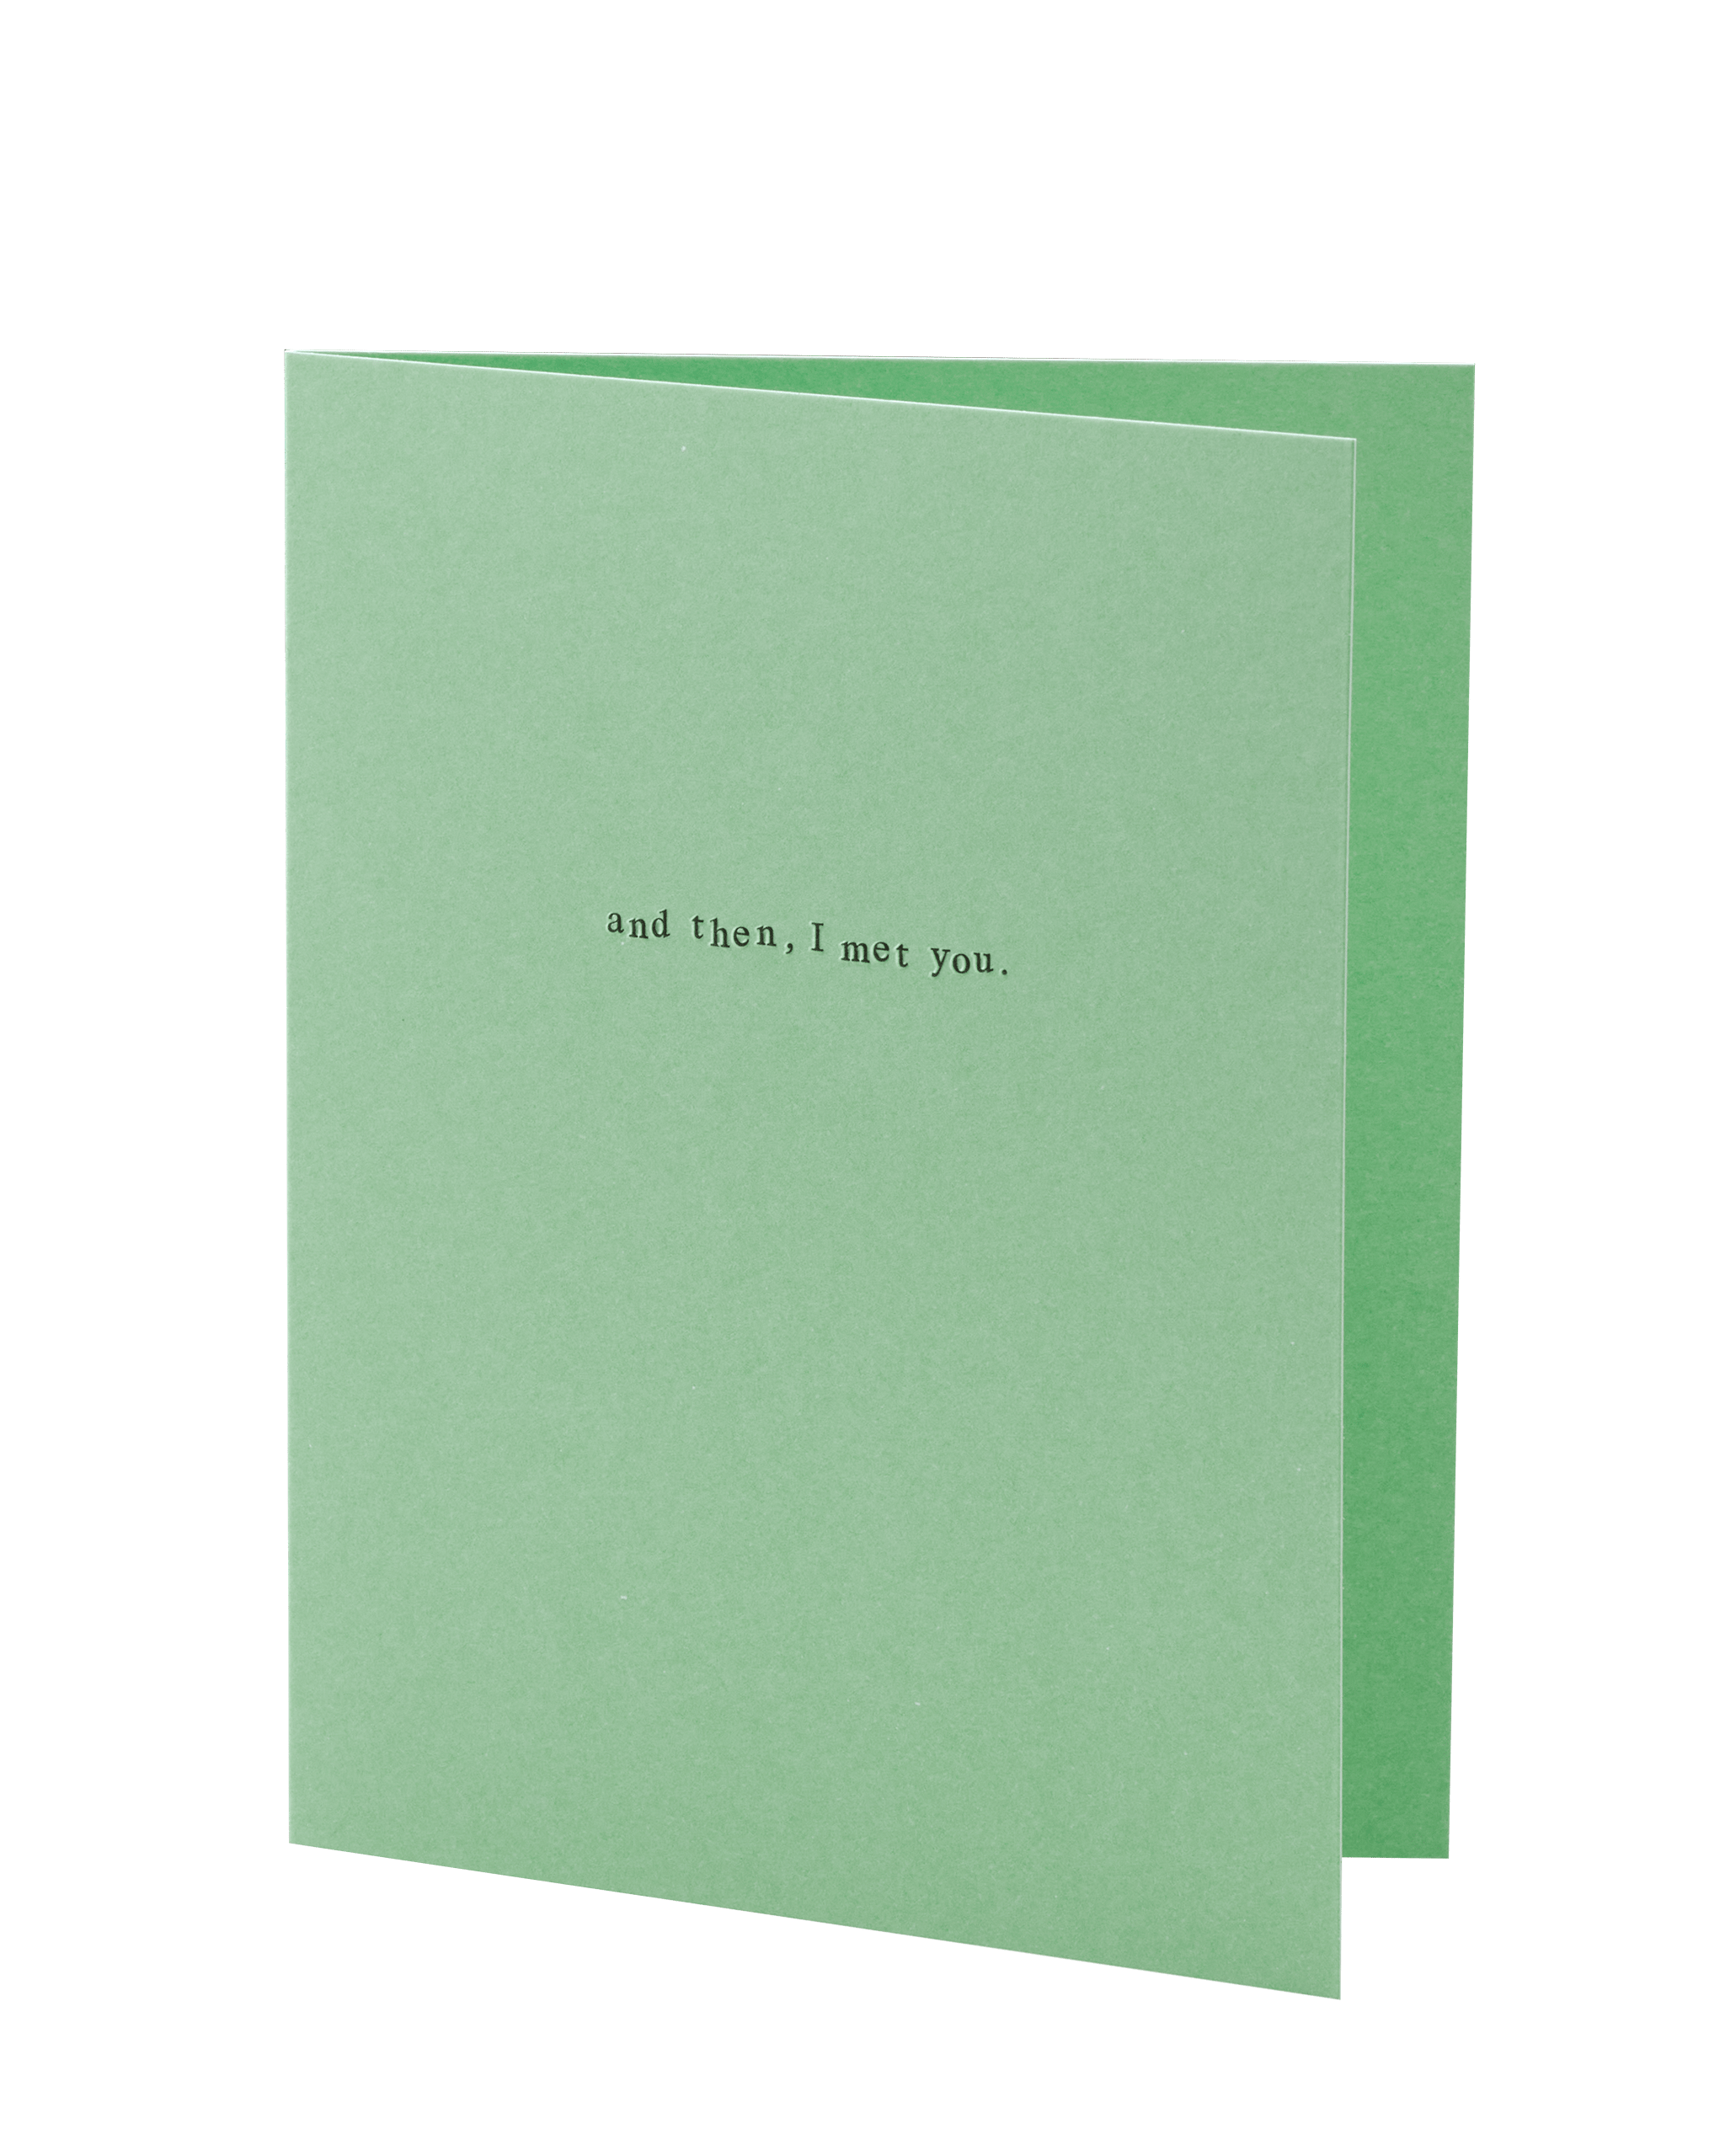 Short Talk Greeting Cards And then I met you by Short Talk